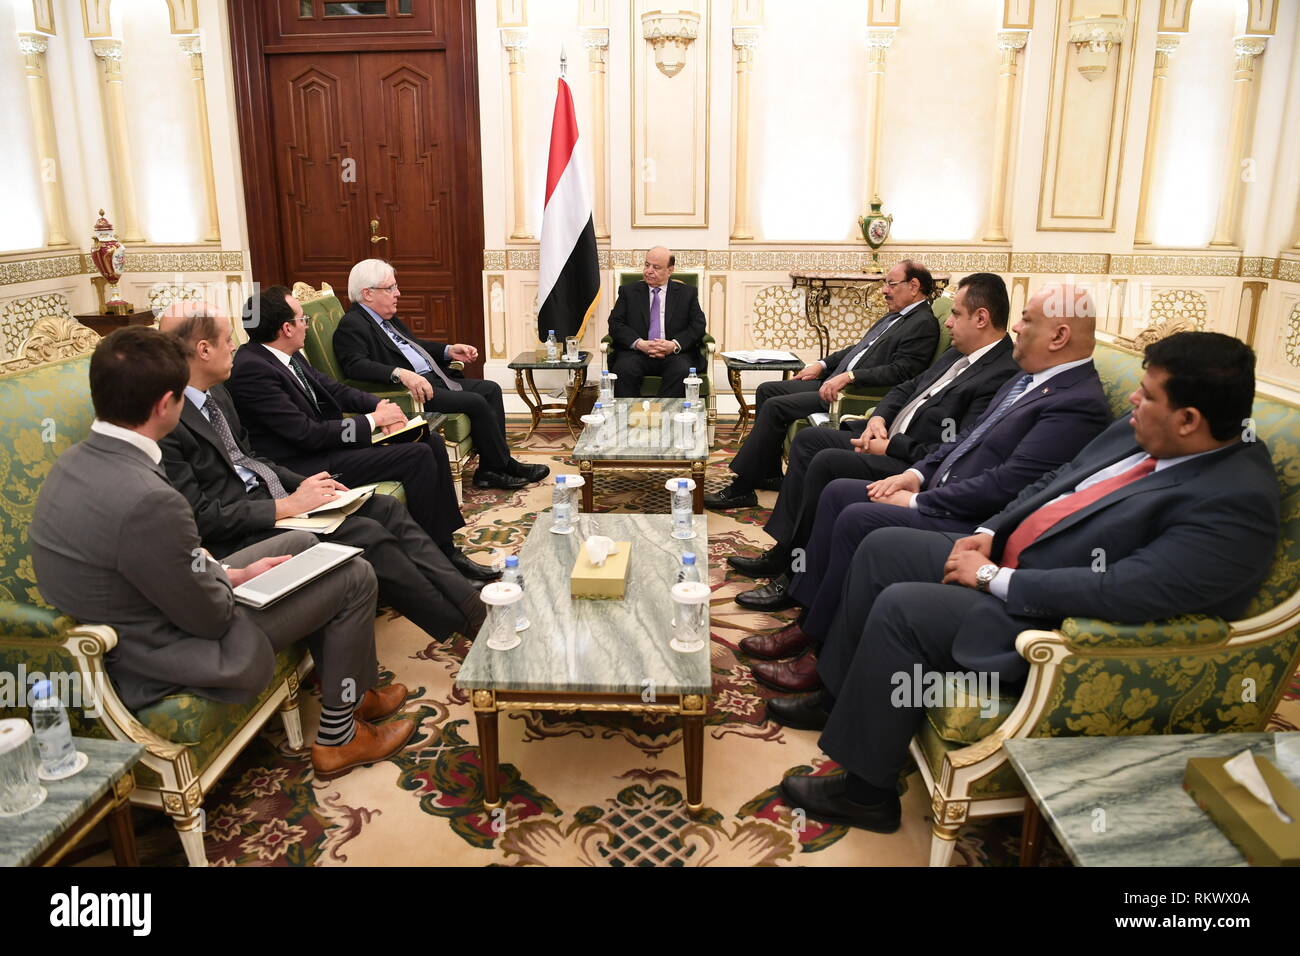 Beijing, China. 13th Feb, 2019. Yemen's internationally-backed President Abdu-Rabbu Mansour Hadi (C) meets with UN special envoy Martin Griffiths (4th L) in Saudi Arabia's capital of Riyadh on Feb. 12, 2019. Abdu-Rabbu Mansour Hadi on Tuesday met with Griffiths, emphasizing the importance of fully implementing the Sweden Agreement. Credit: Xinhua/Alamy Live News Stock Photo